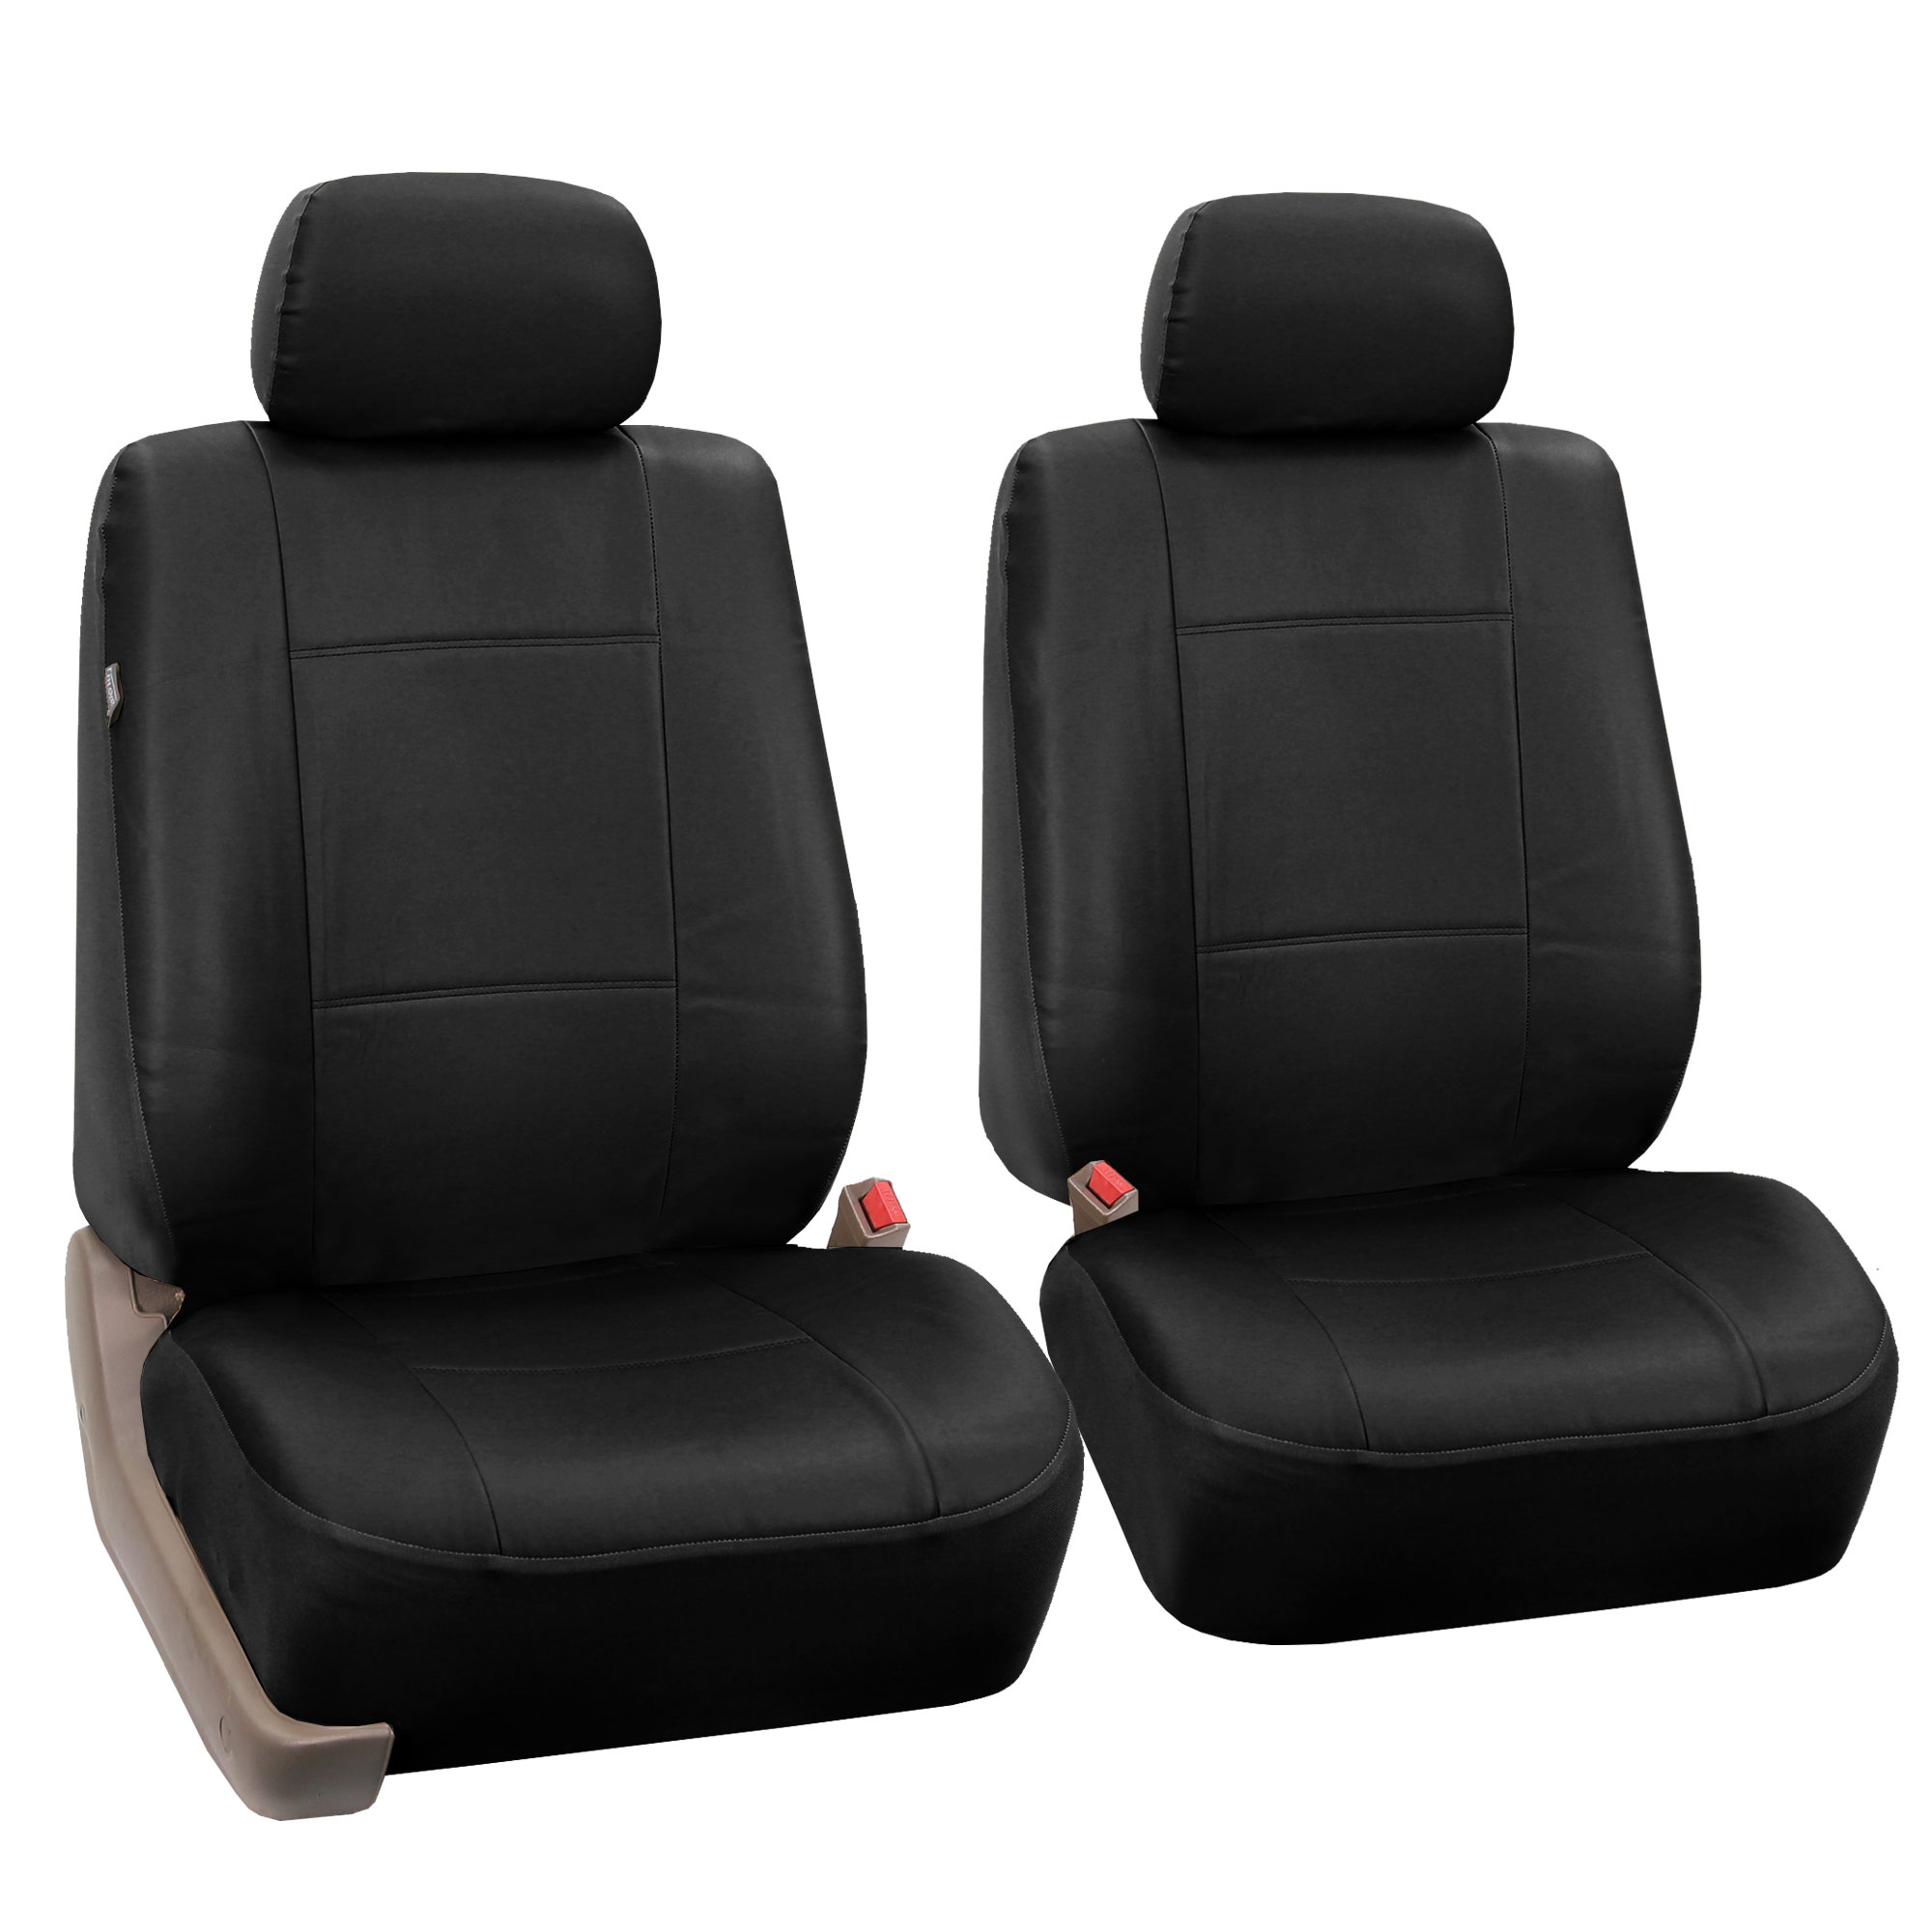 FH Group Faux Leather Airbag Compatible and Split Bench Car Seat Covers, Full Set, Black - image 2 of 4